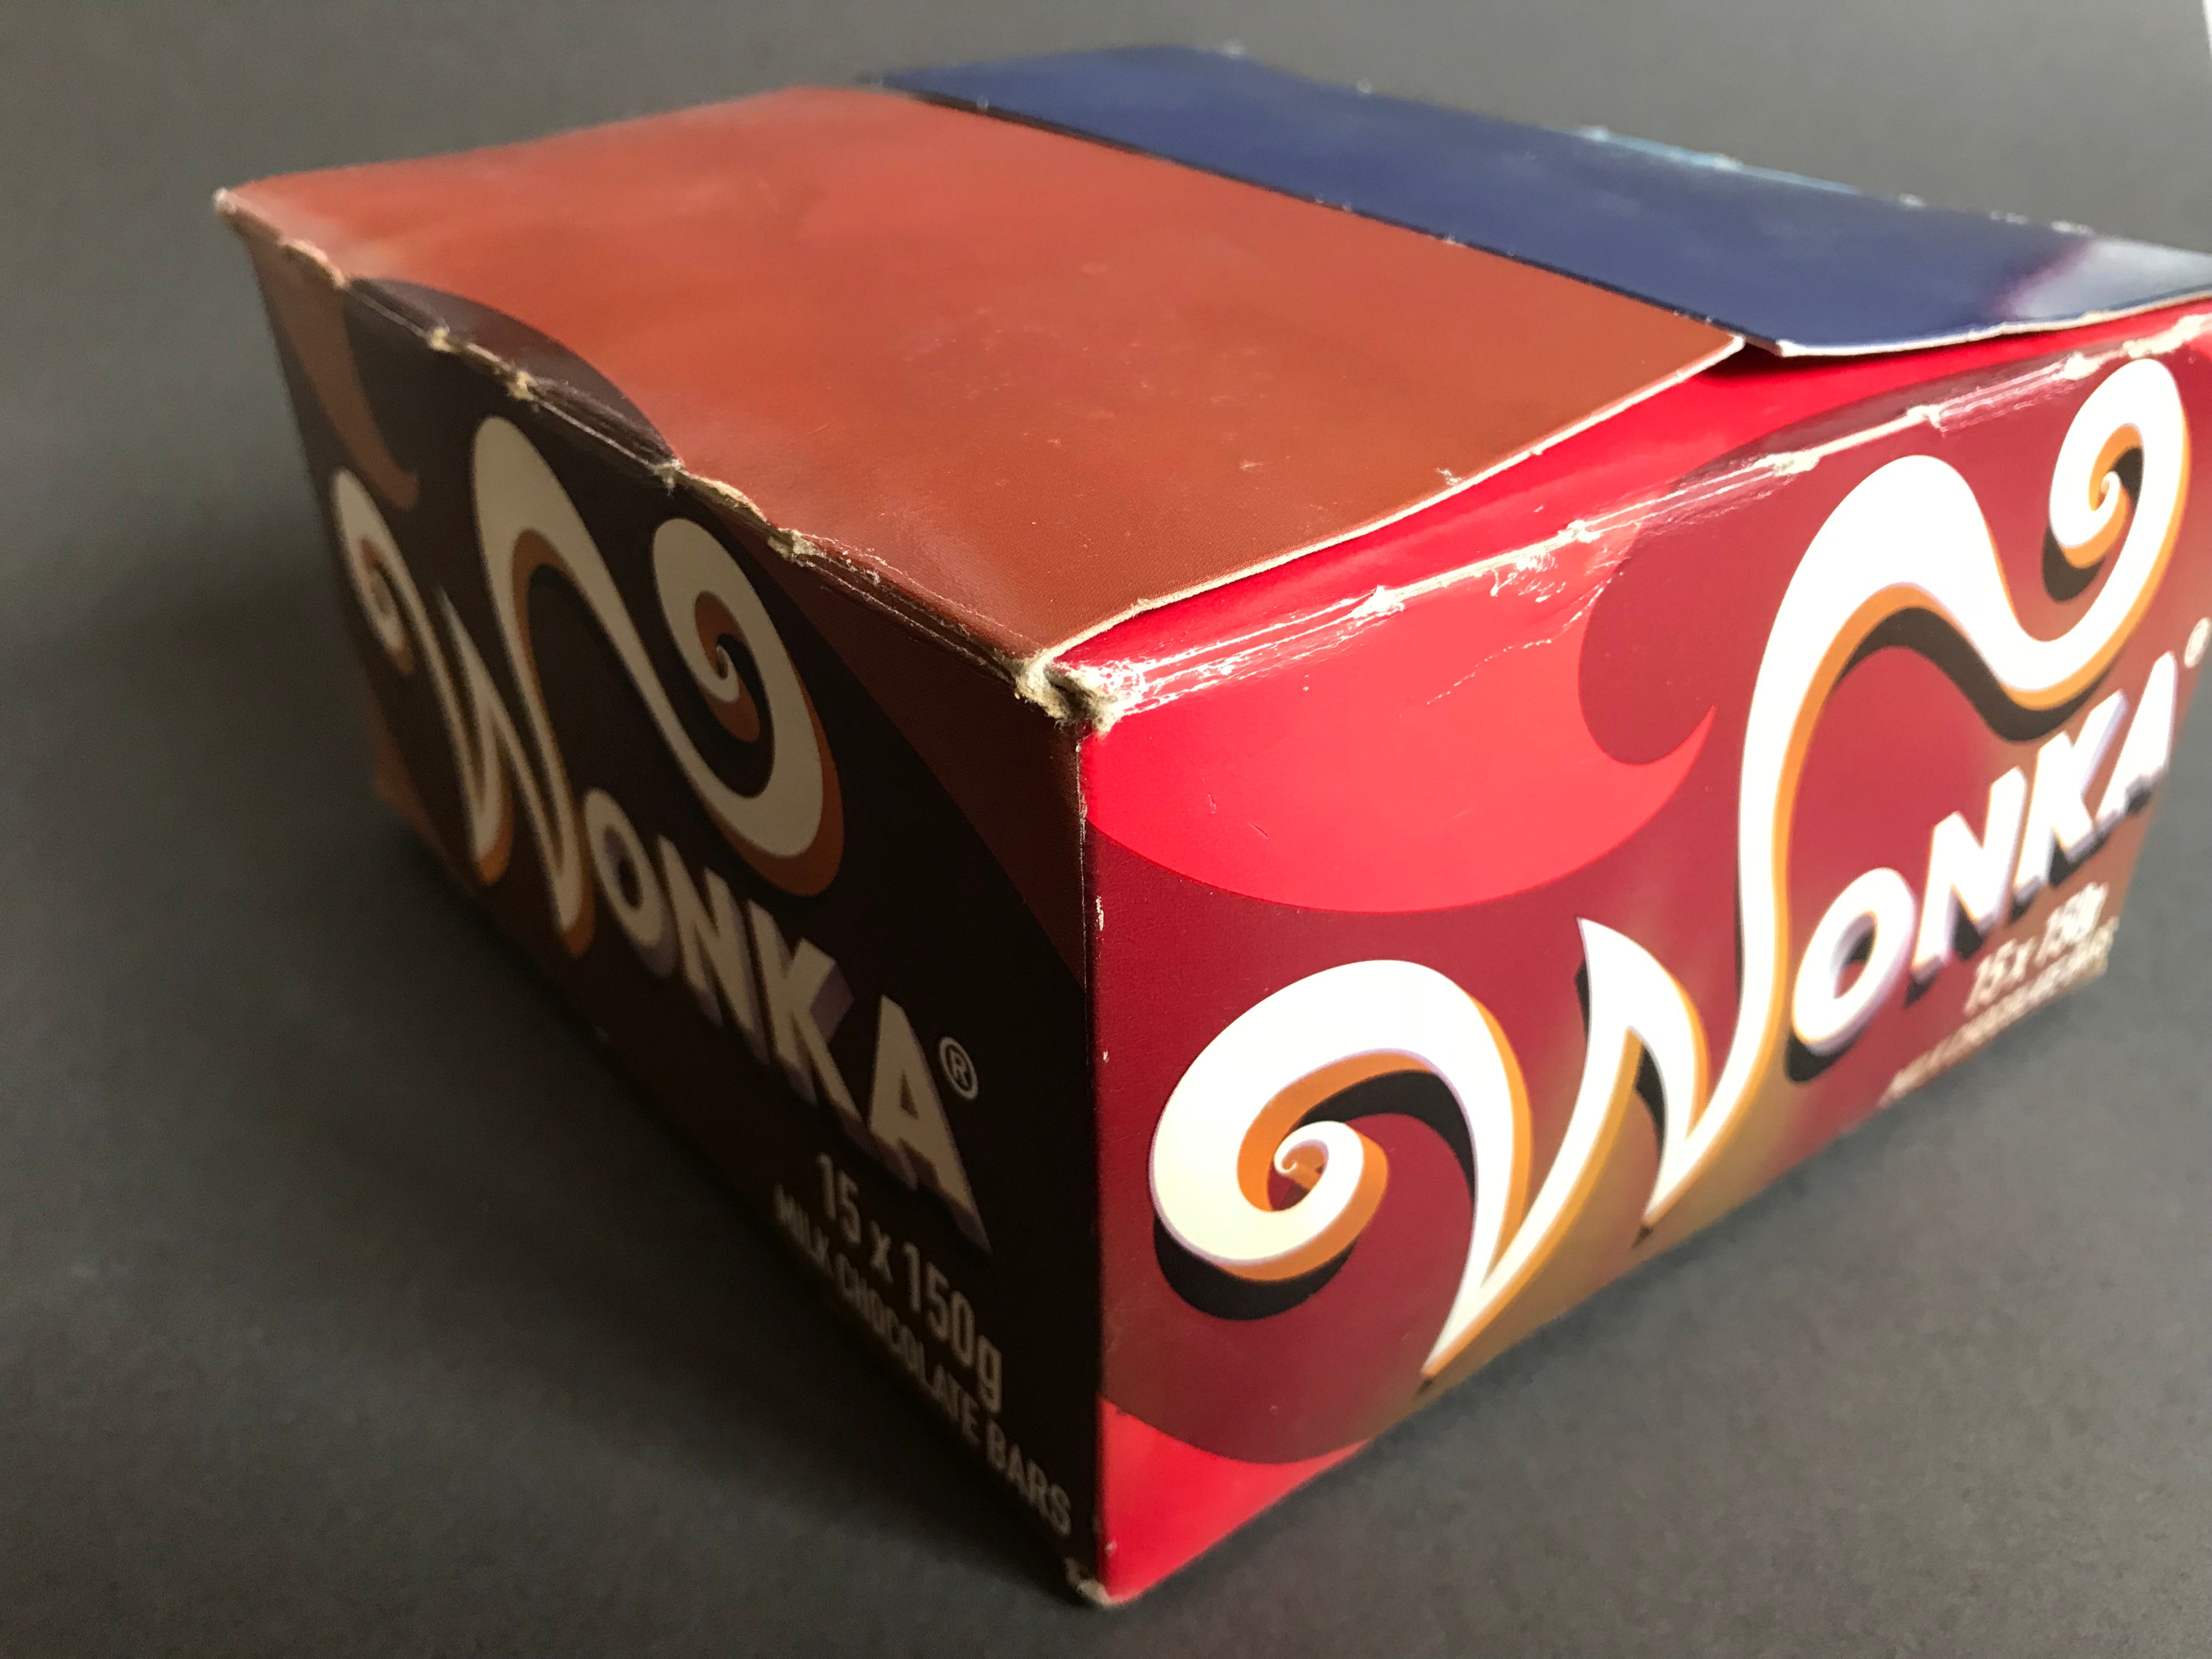 Charlie & The Chocolate Factory (2005) - A Wonka Bar Packing Box (SOLD)